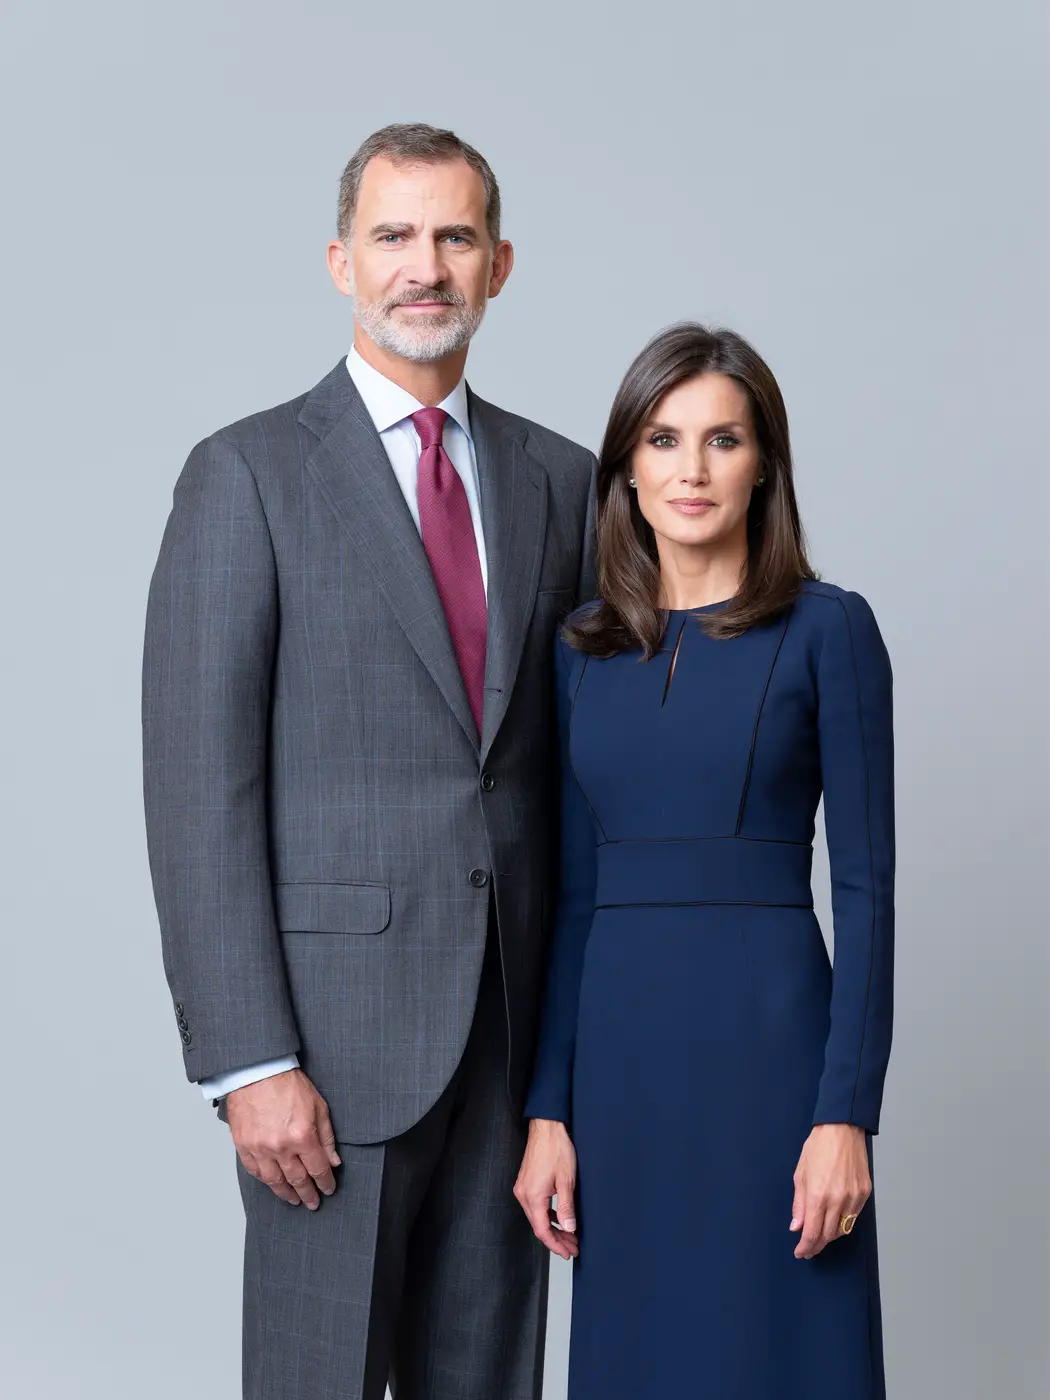 King Felipe and Queen Letizia of Spain's official portraits released by the palace